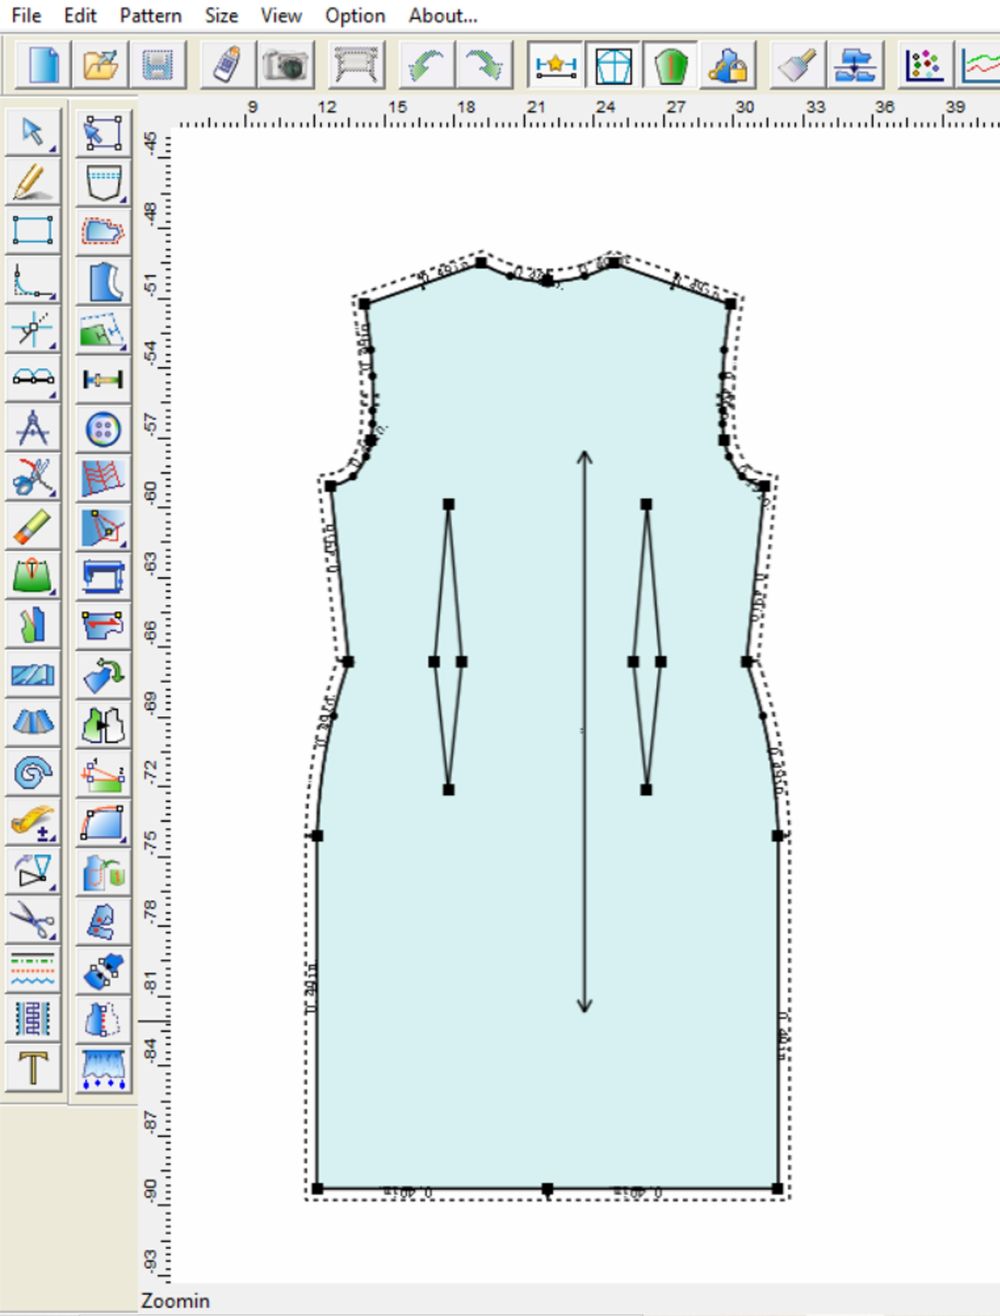 Richpeace CAD Pattern Drafting - VSC